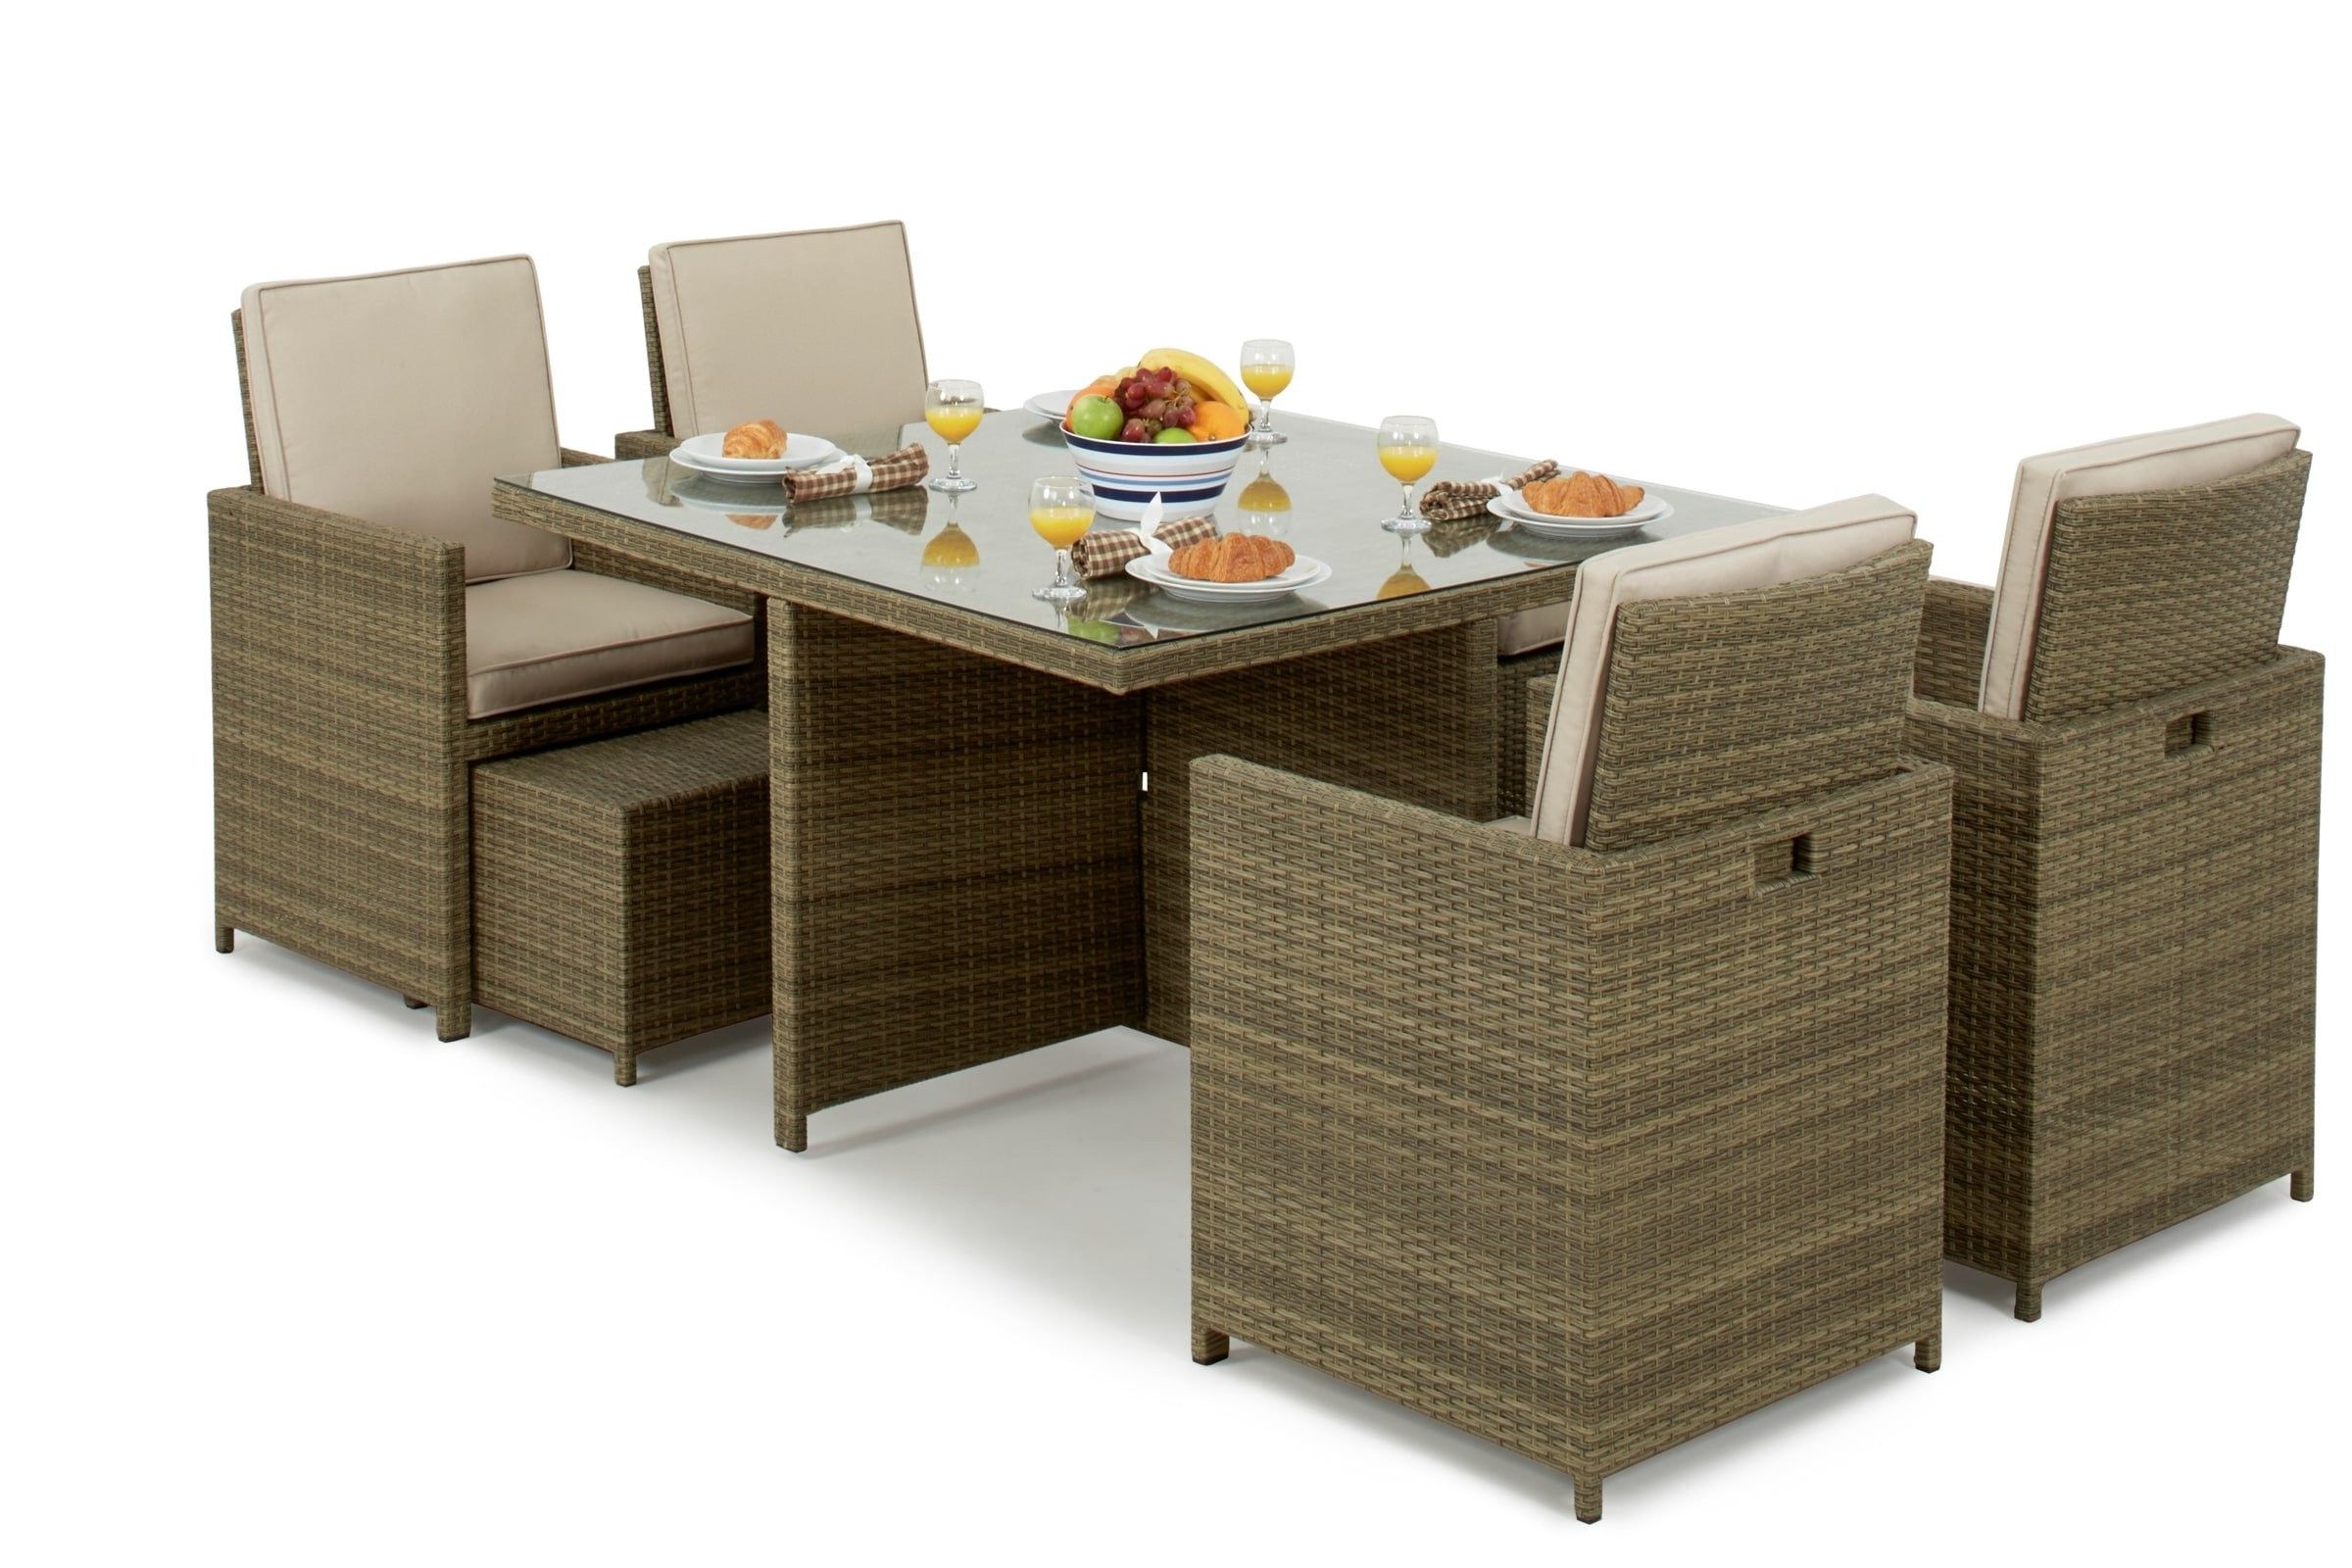 Rattan Furniture With 5 Piece 4 Seat Outdoor Patio Sets (View 8 of 15)